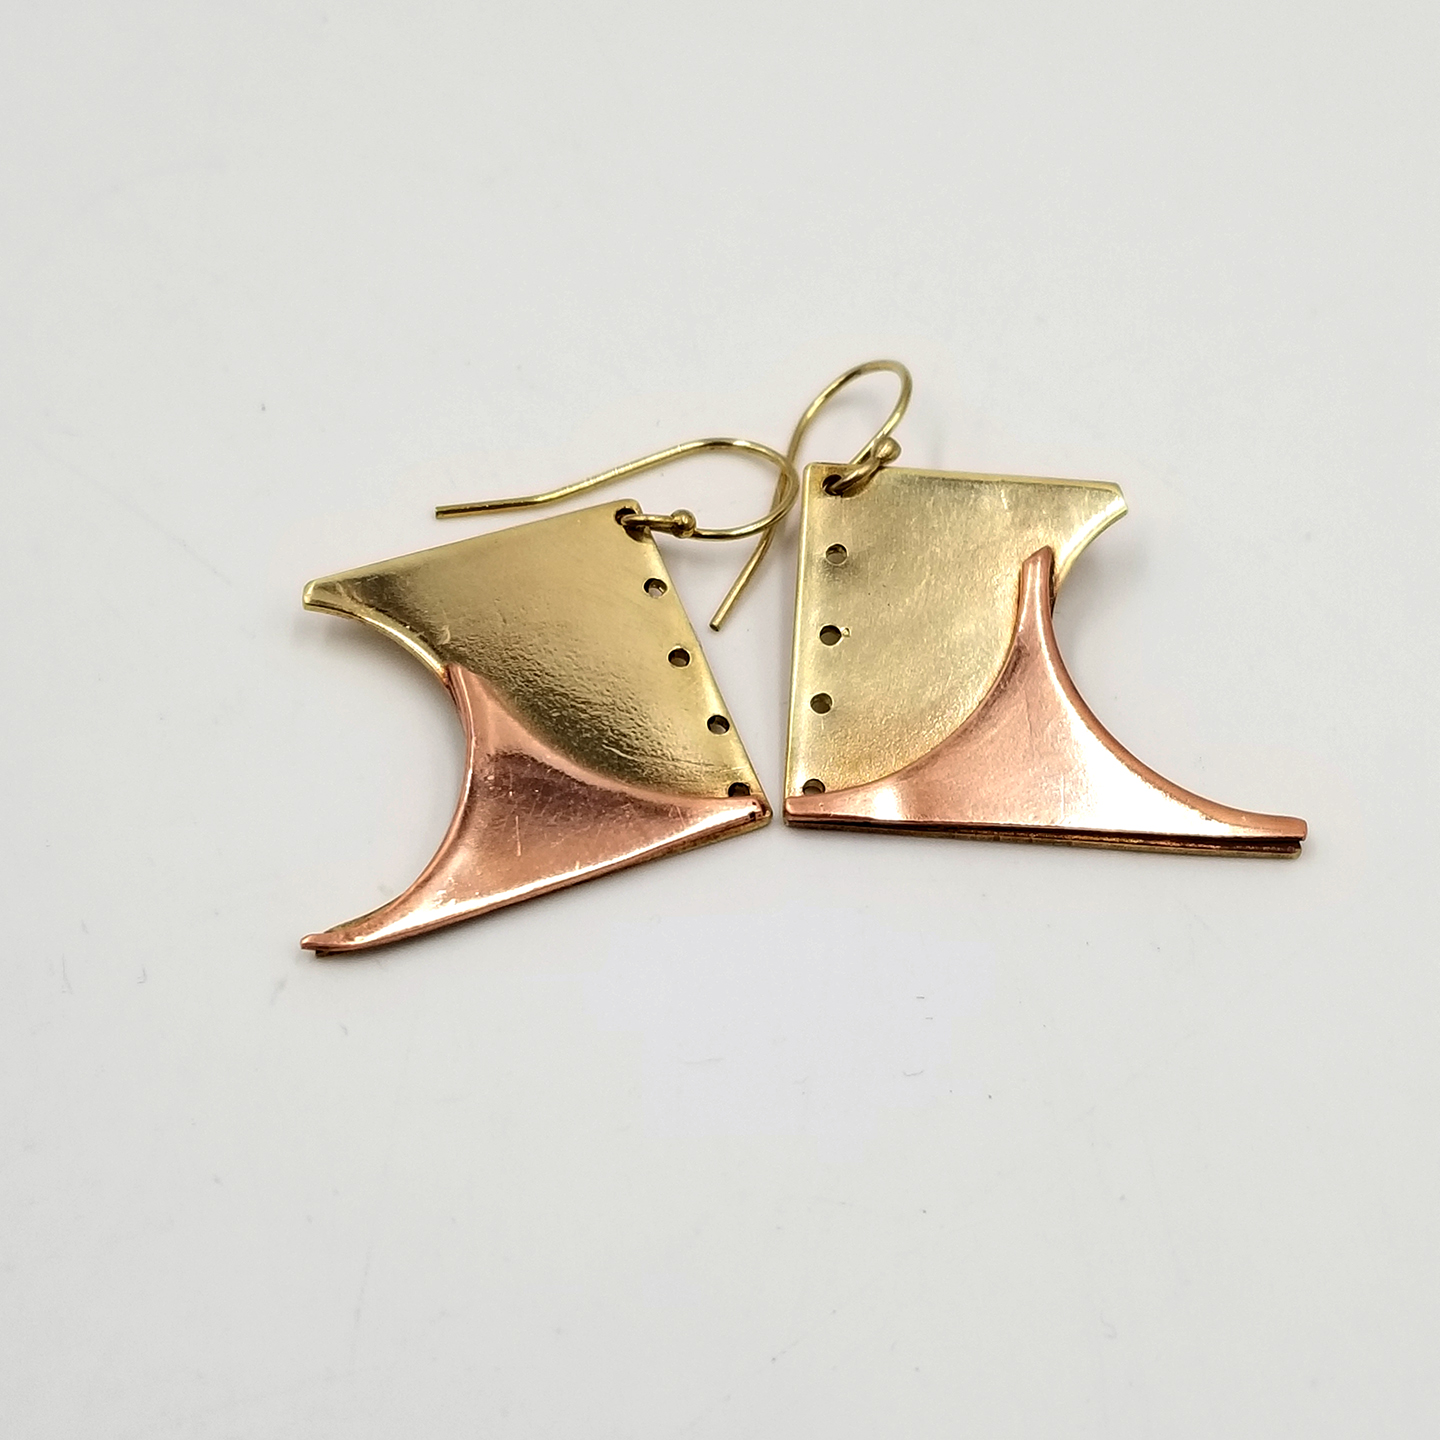 Brass and Copper earrings resembling cowboy boots